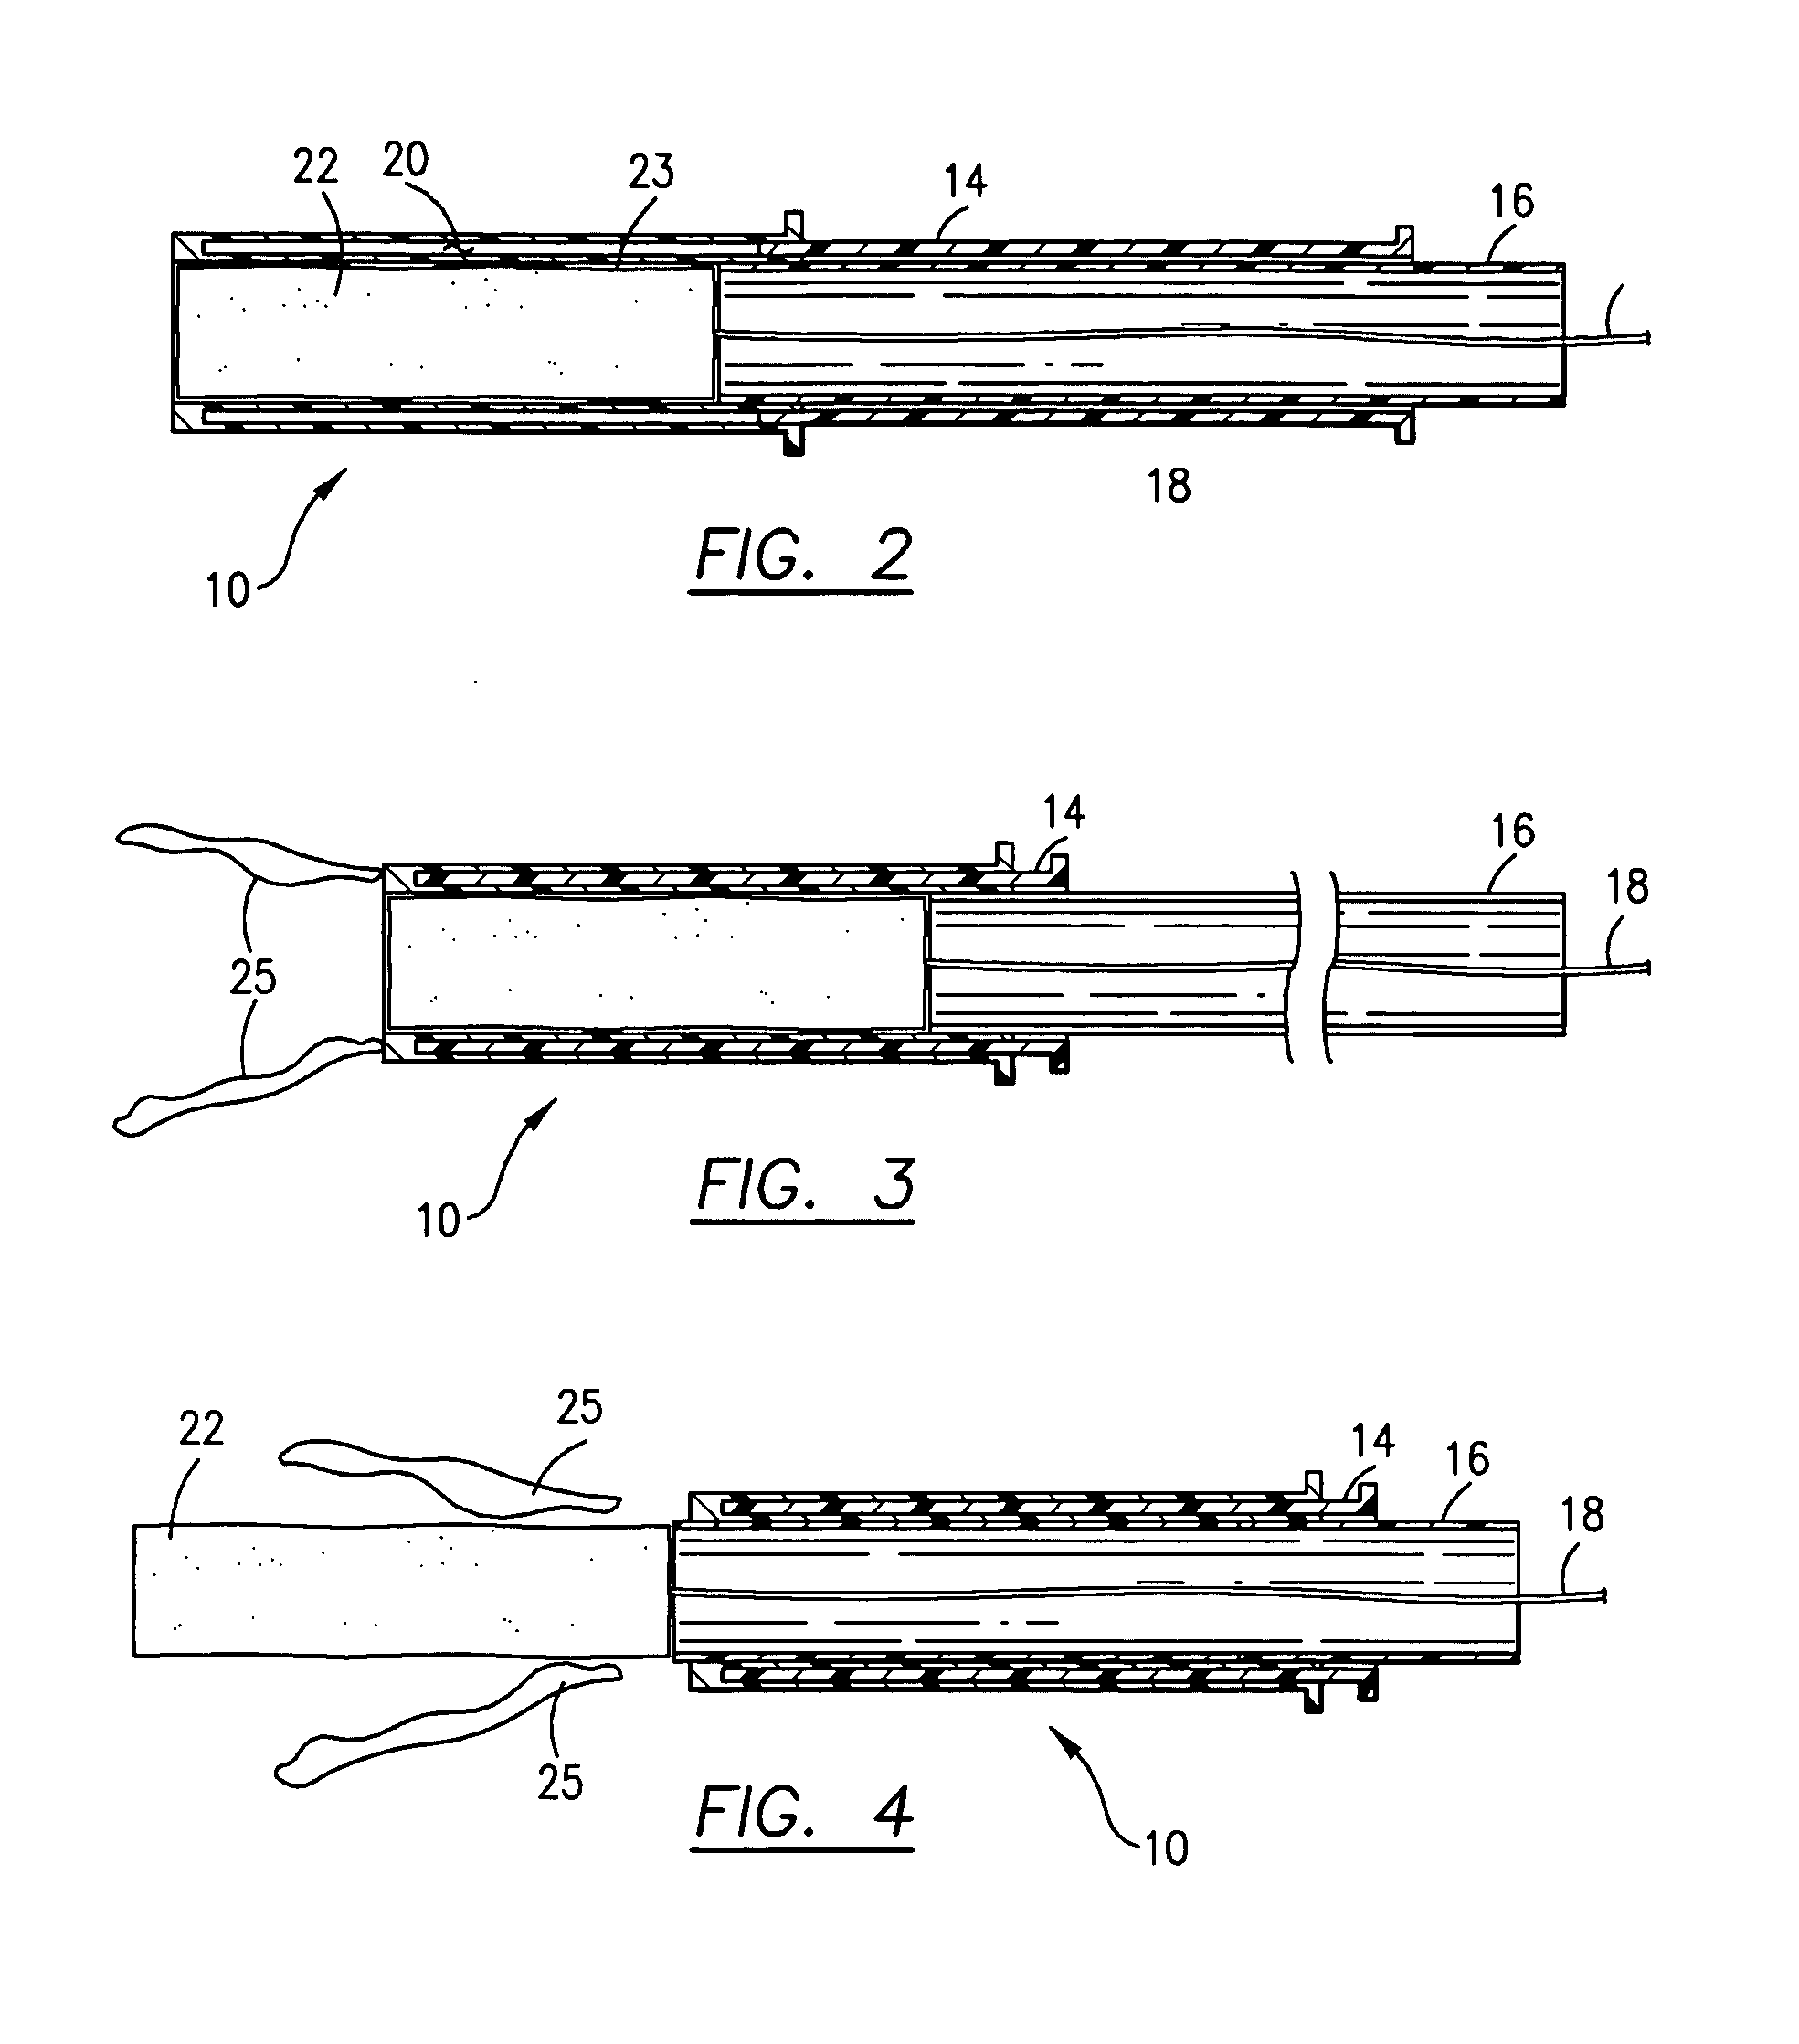 Apparatus and method for the treatment of dysmenorrhea